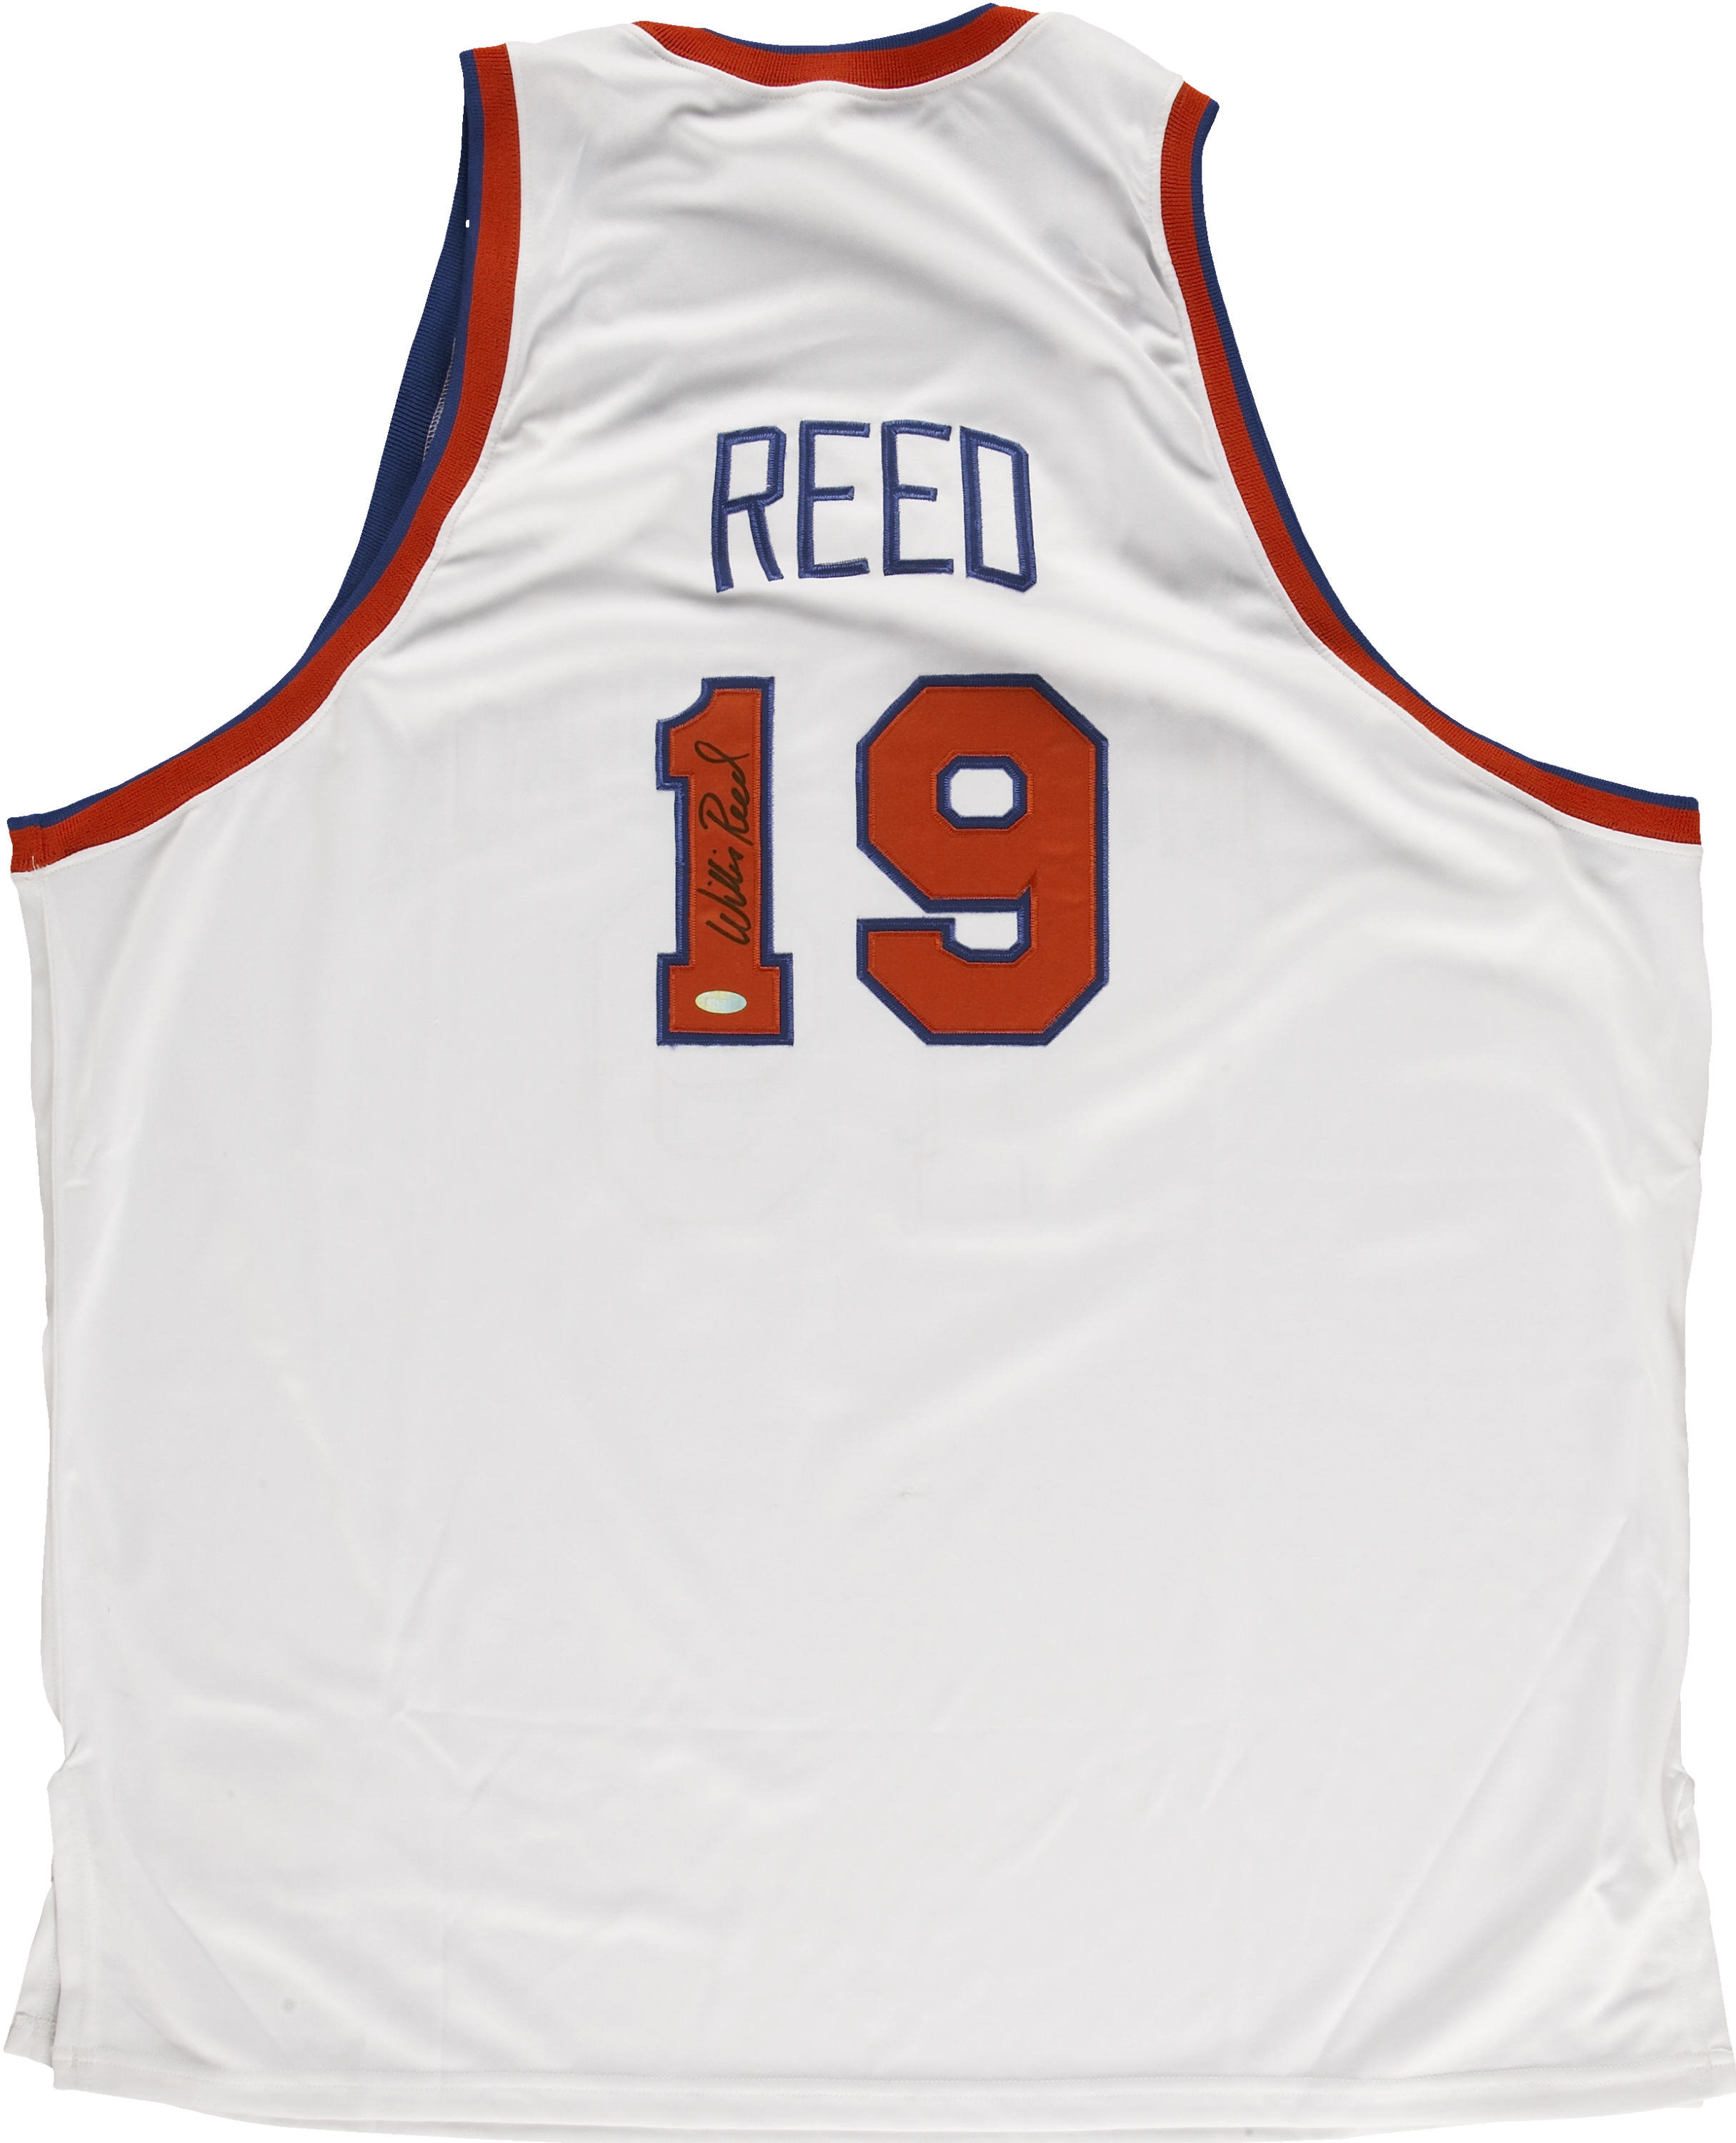 Willis Reed New York Knicks jersey: Where to buy legendary player's gear  online 